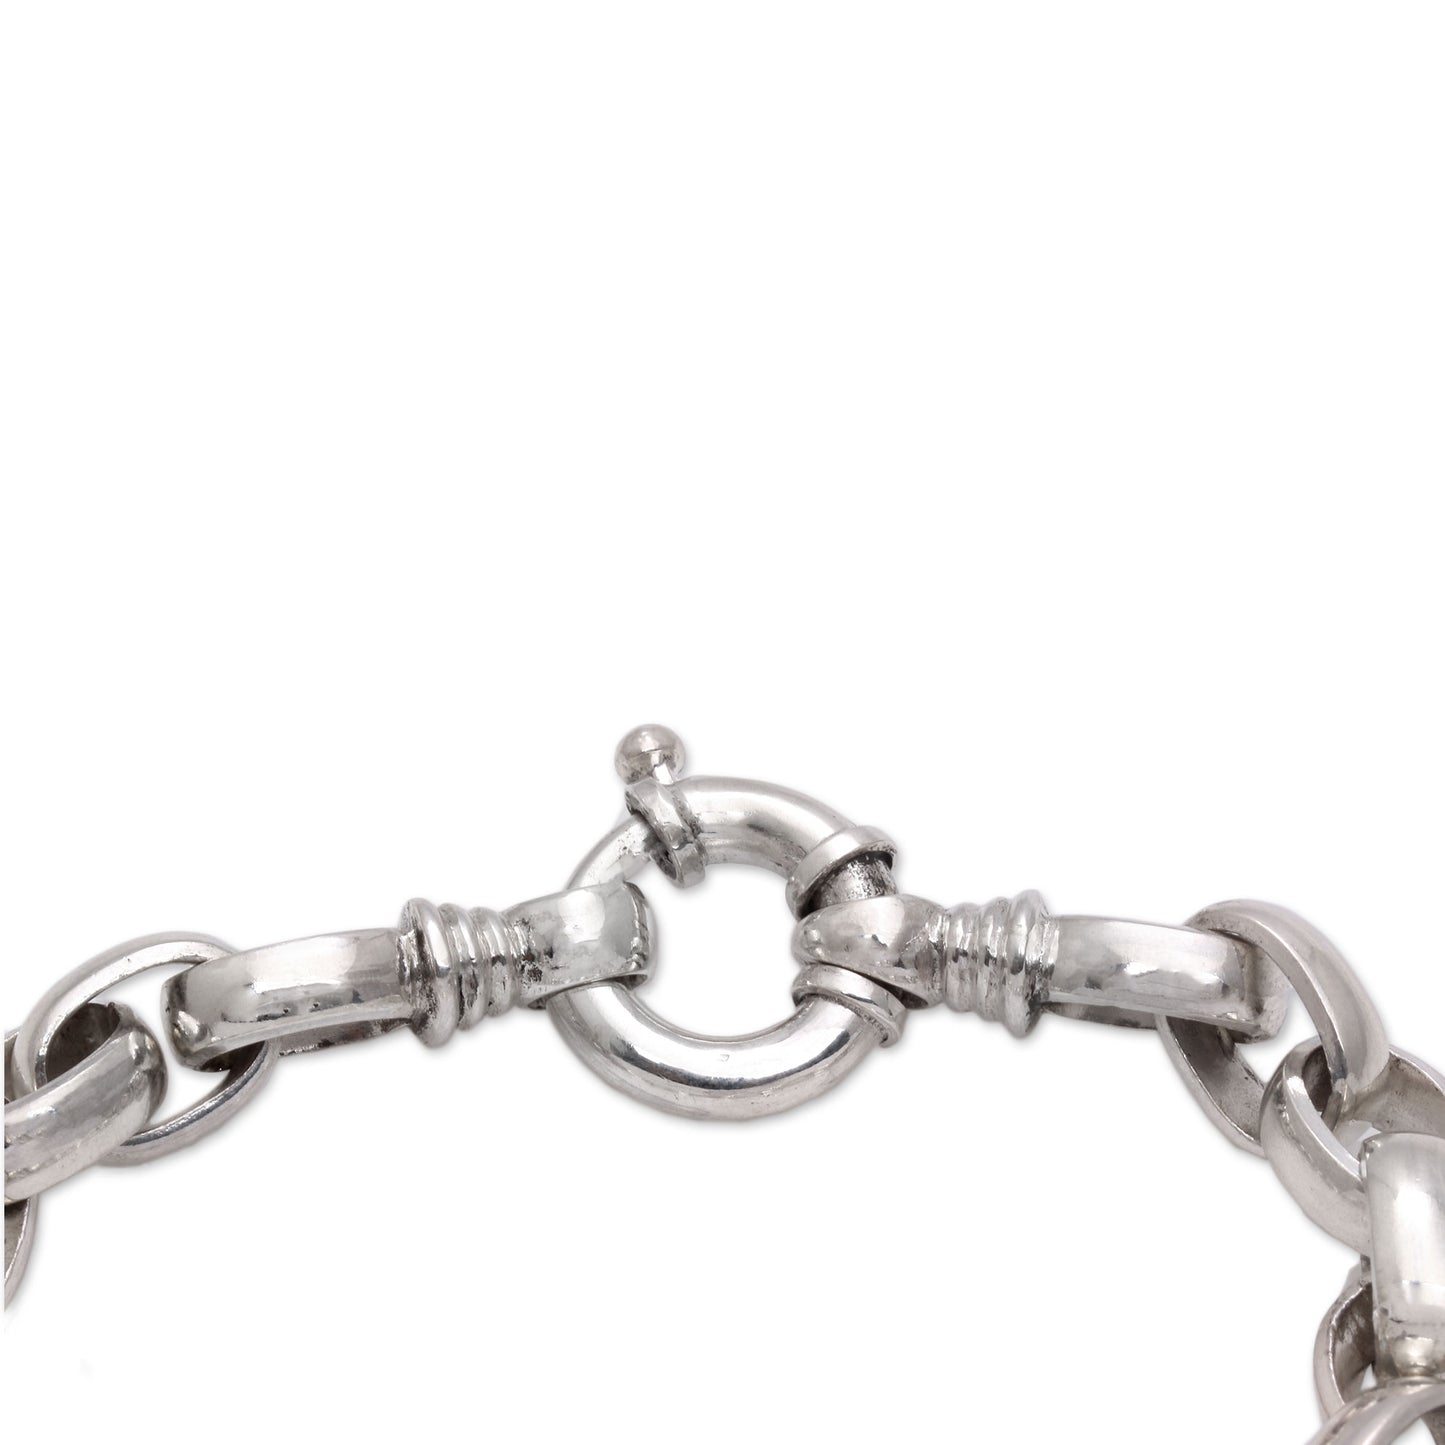 Cager Links Sterling Silver Chain Bracelet